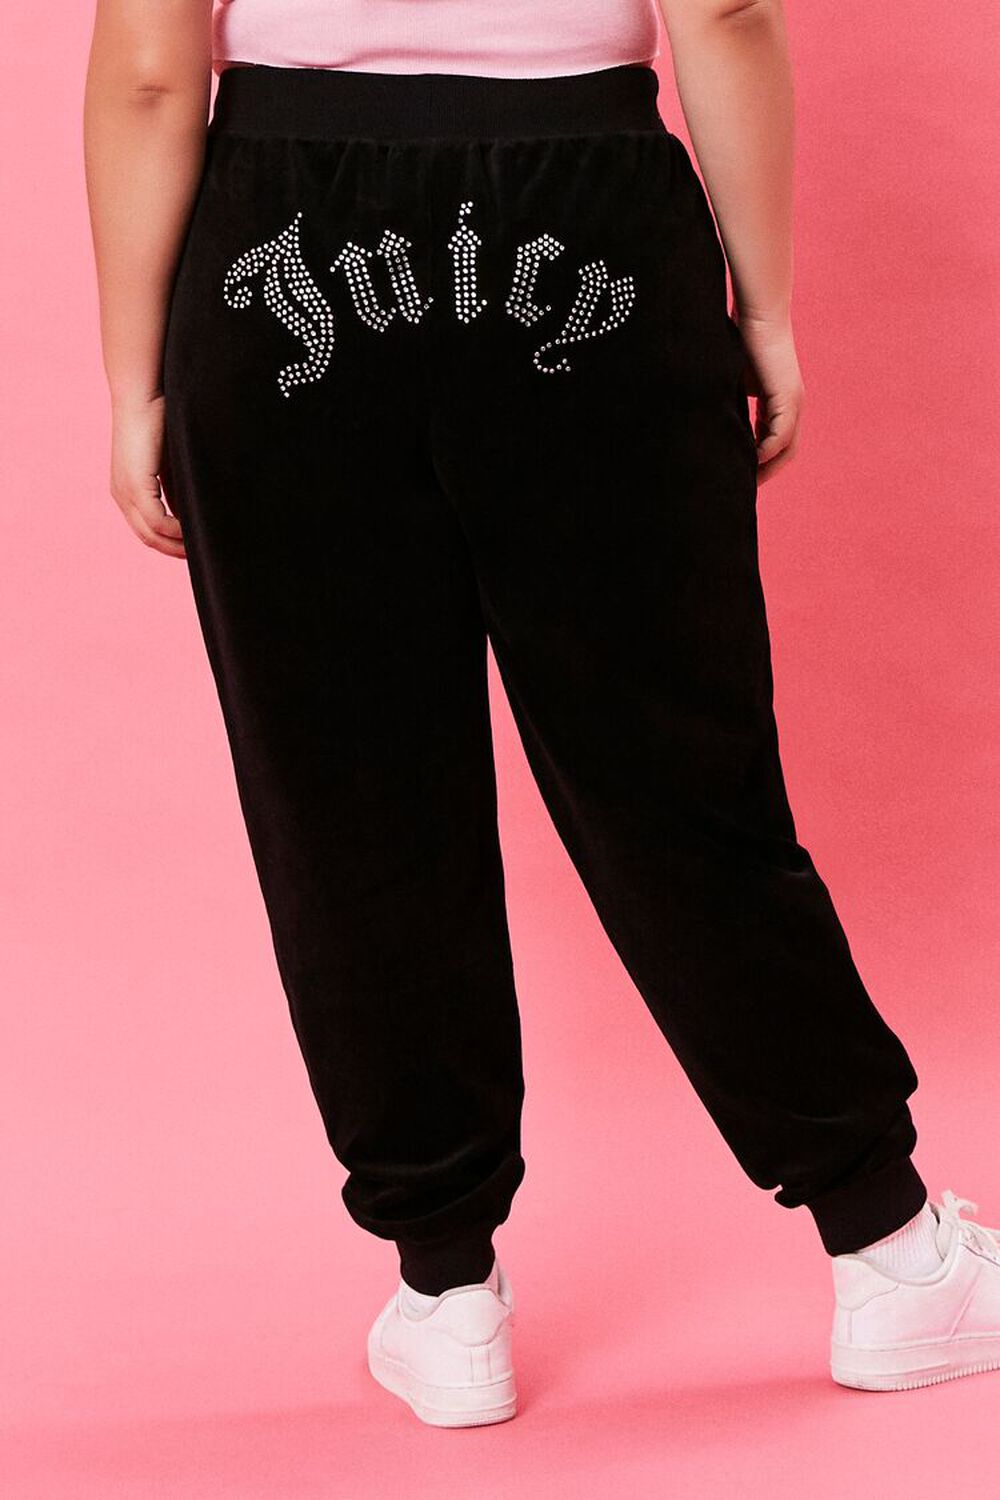 Sold at Auction: Women's JUICY COUTURE Sweat Pants Size Medium